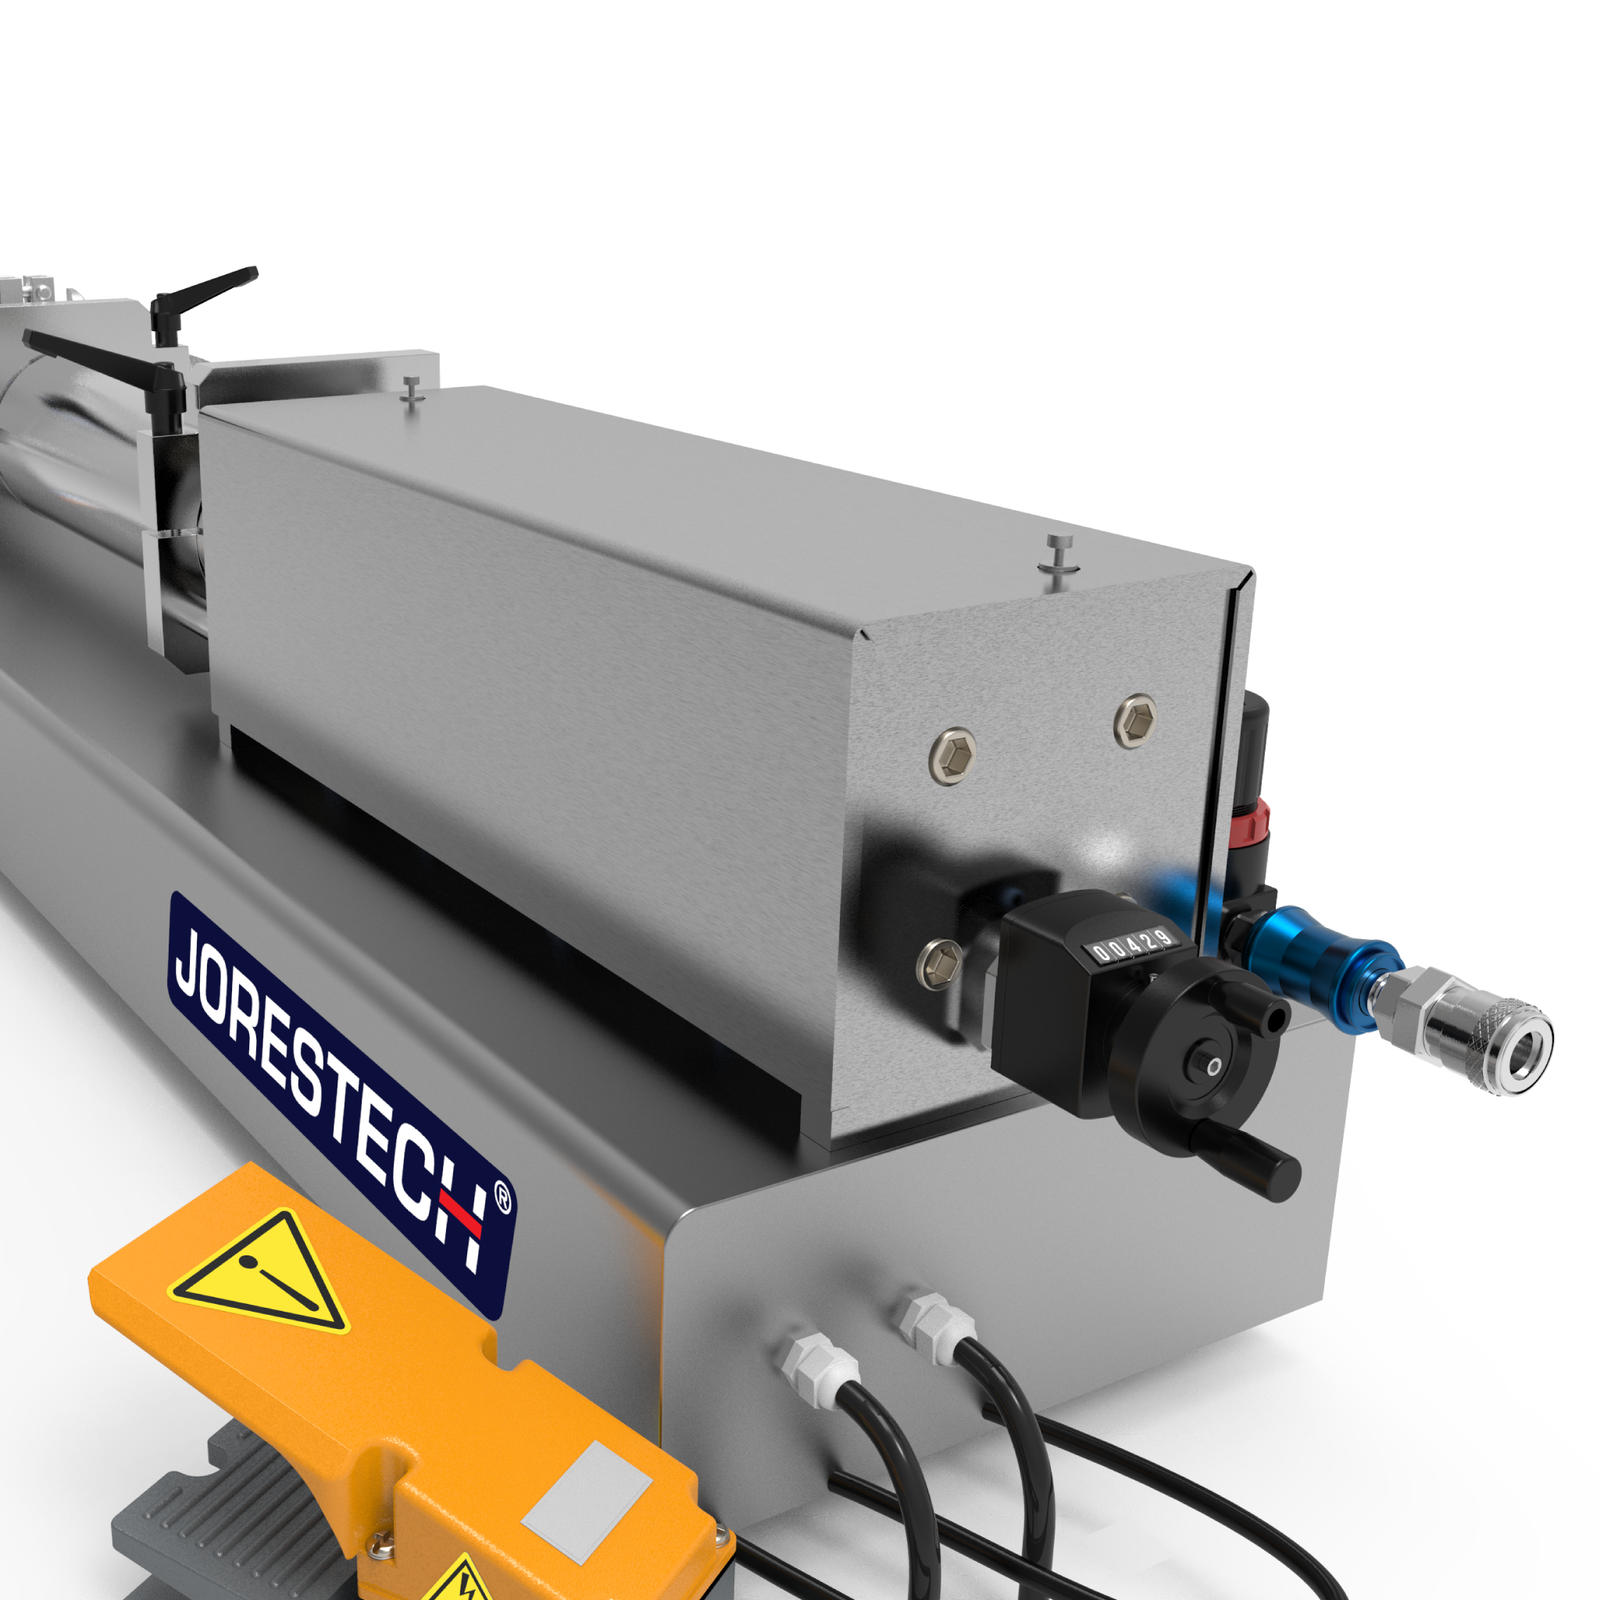 Low viscosity Jorestech liquid filling machine shown from the back. The fill volume adjuster, main input hose, foot pedal, and compressed air connector can be easily appreciated.